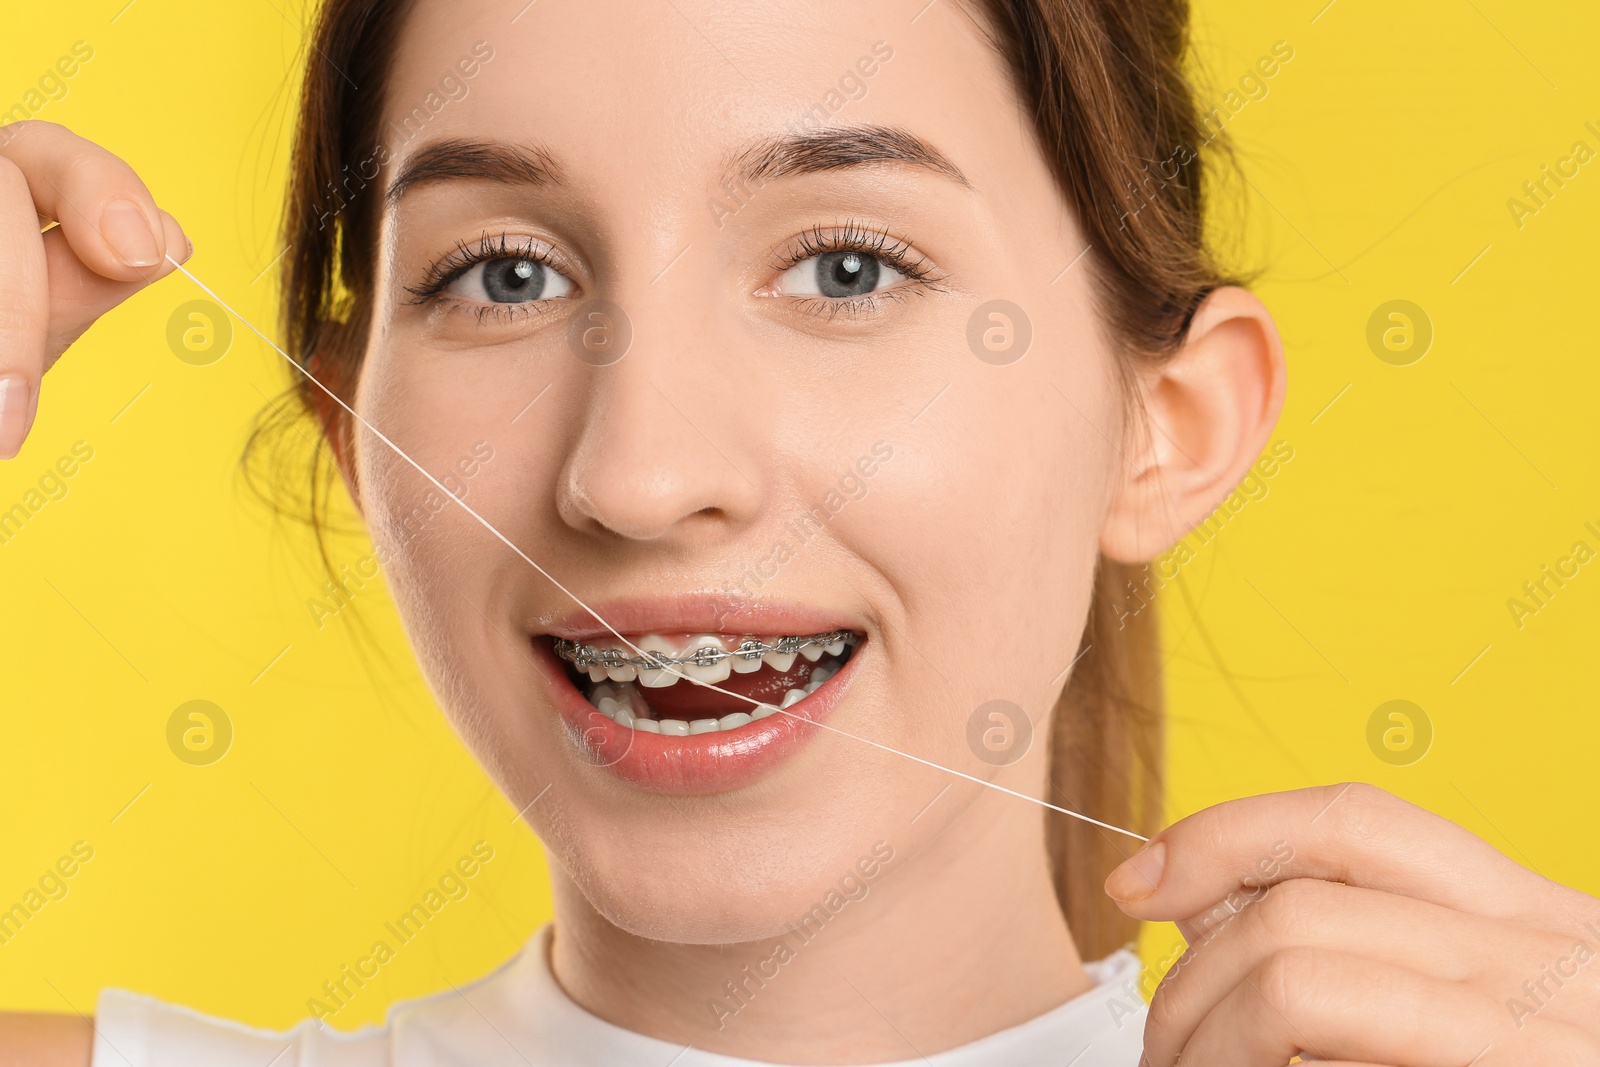 Photo of Smiling woman with braces cleaning teeth using dental floss on yellow background, closeup